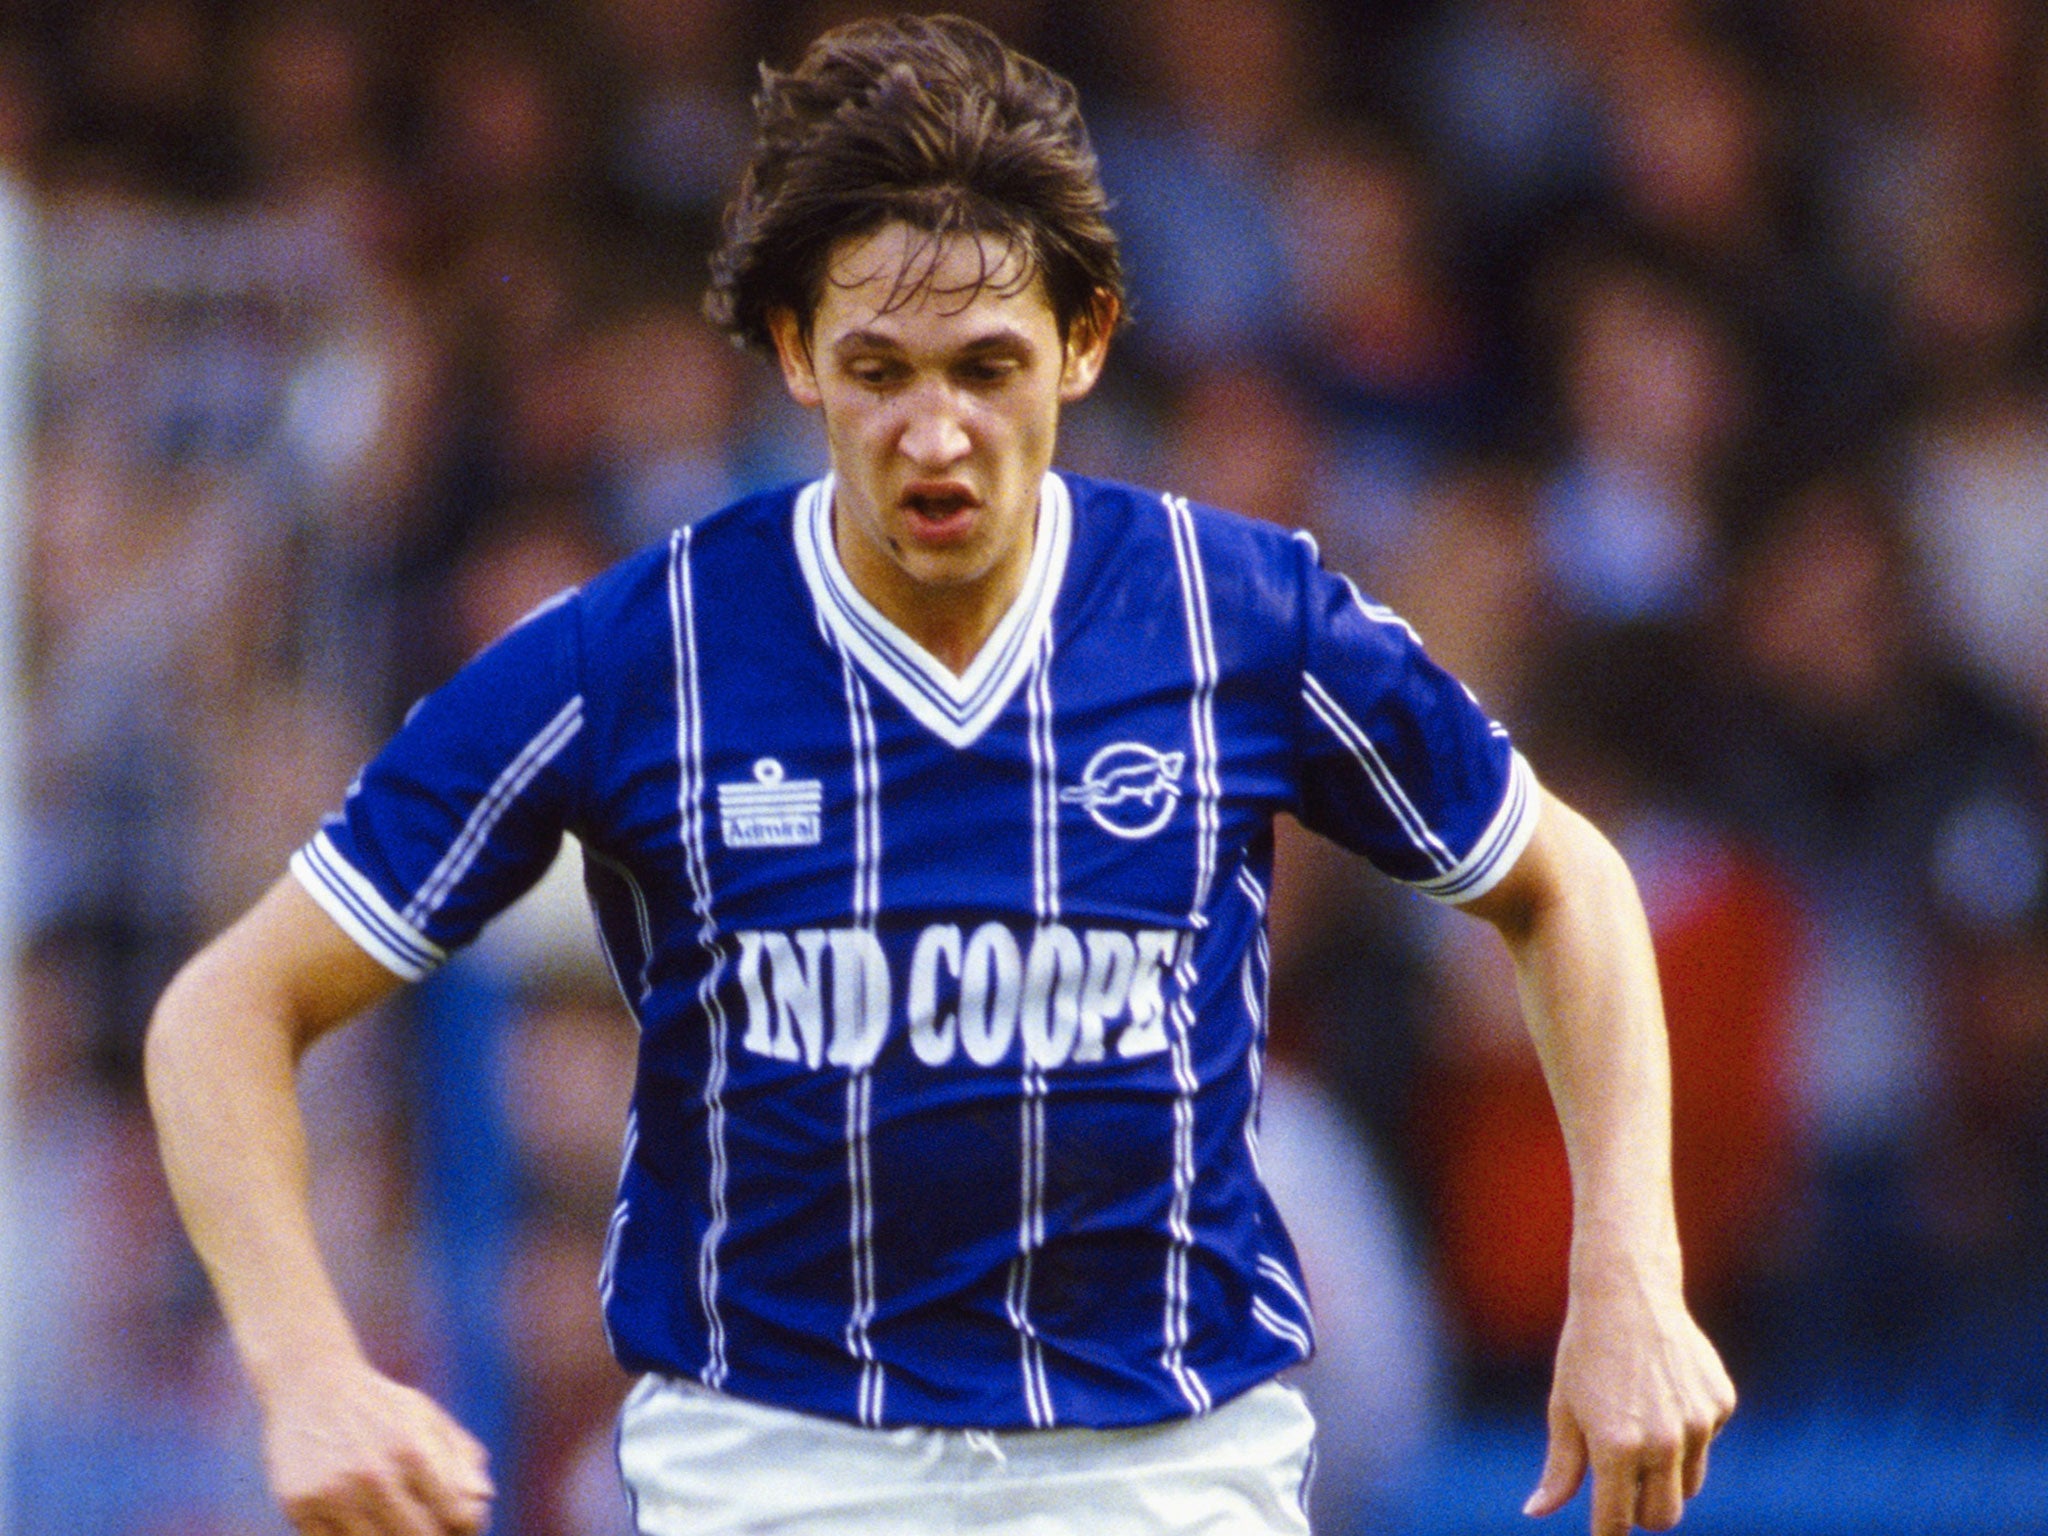 Gary Lineker scored 95 league goals in his 194 league appearances for Leicester